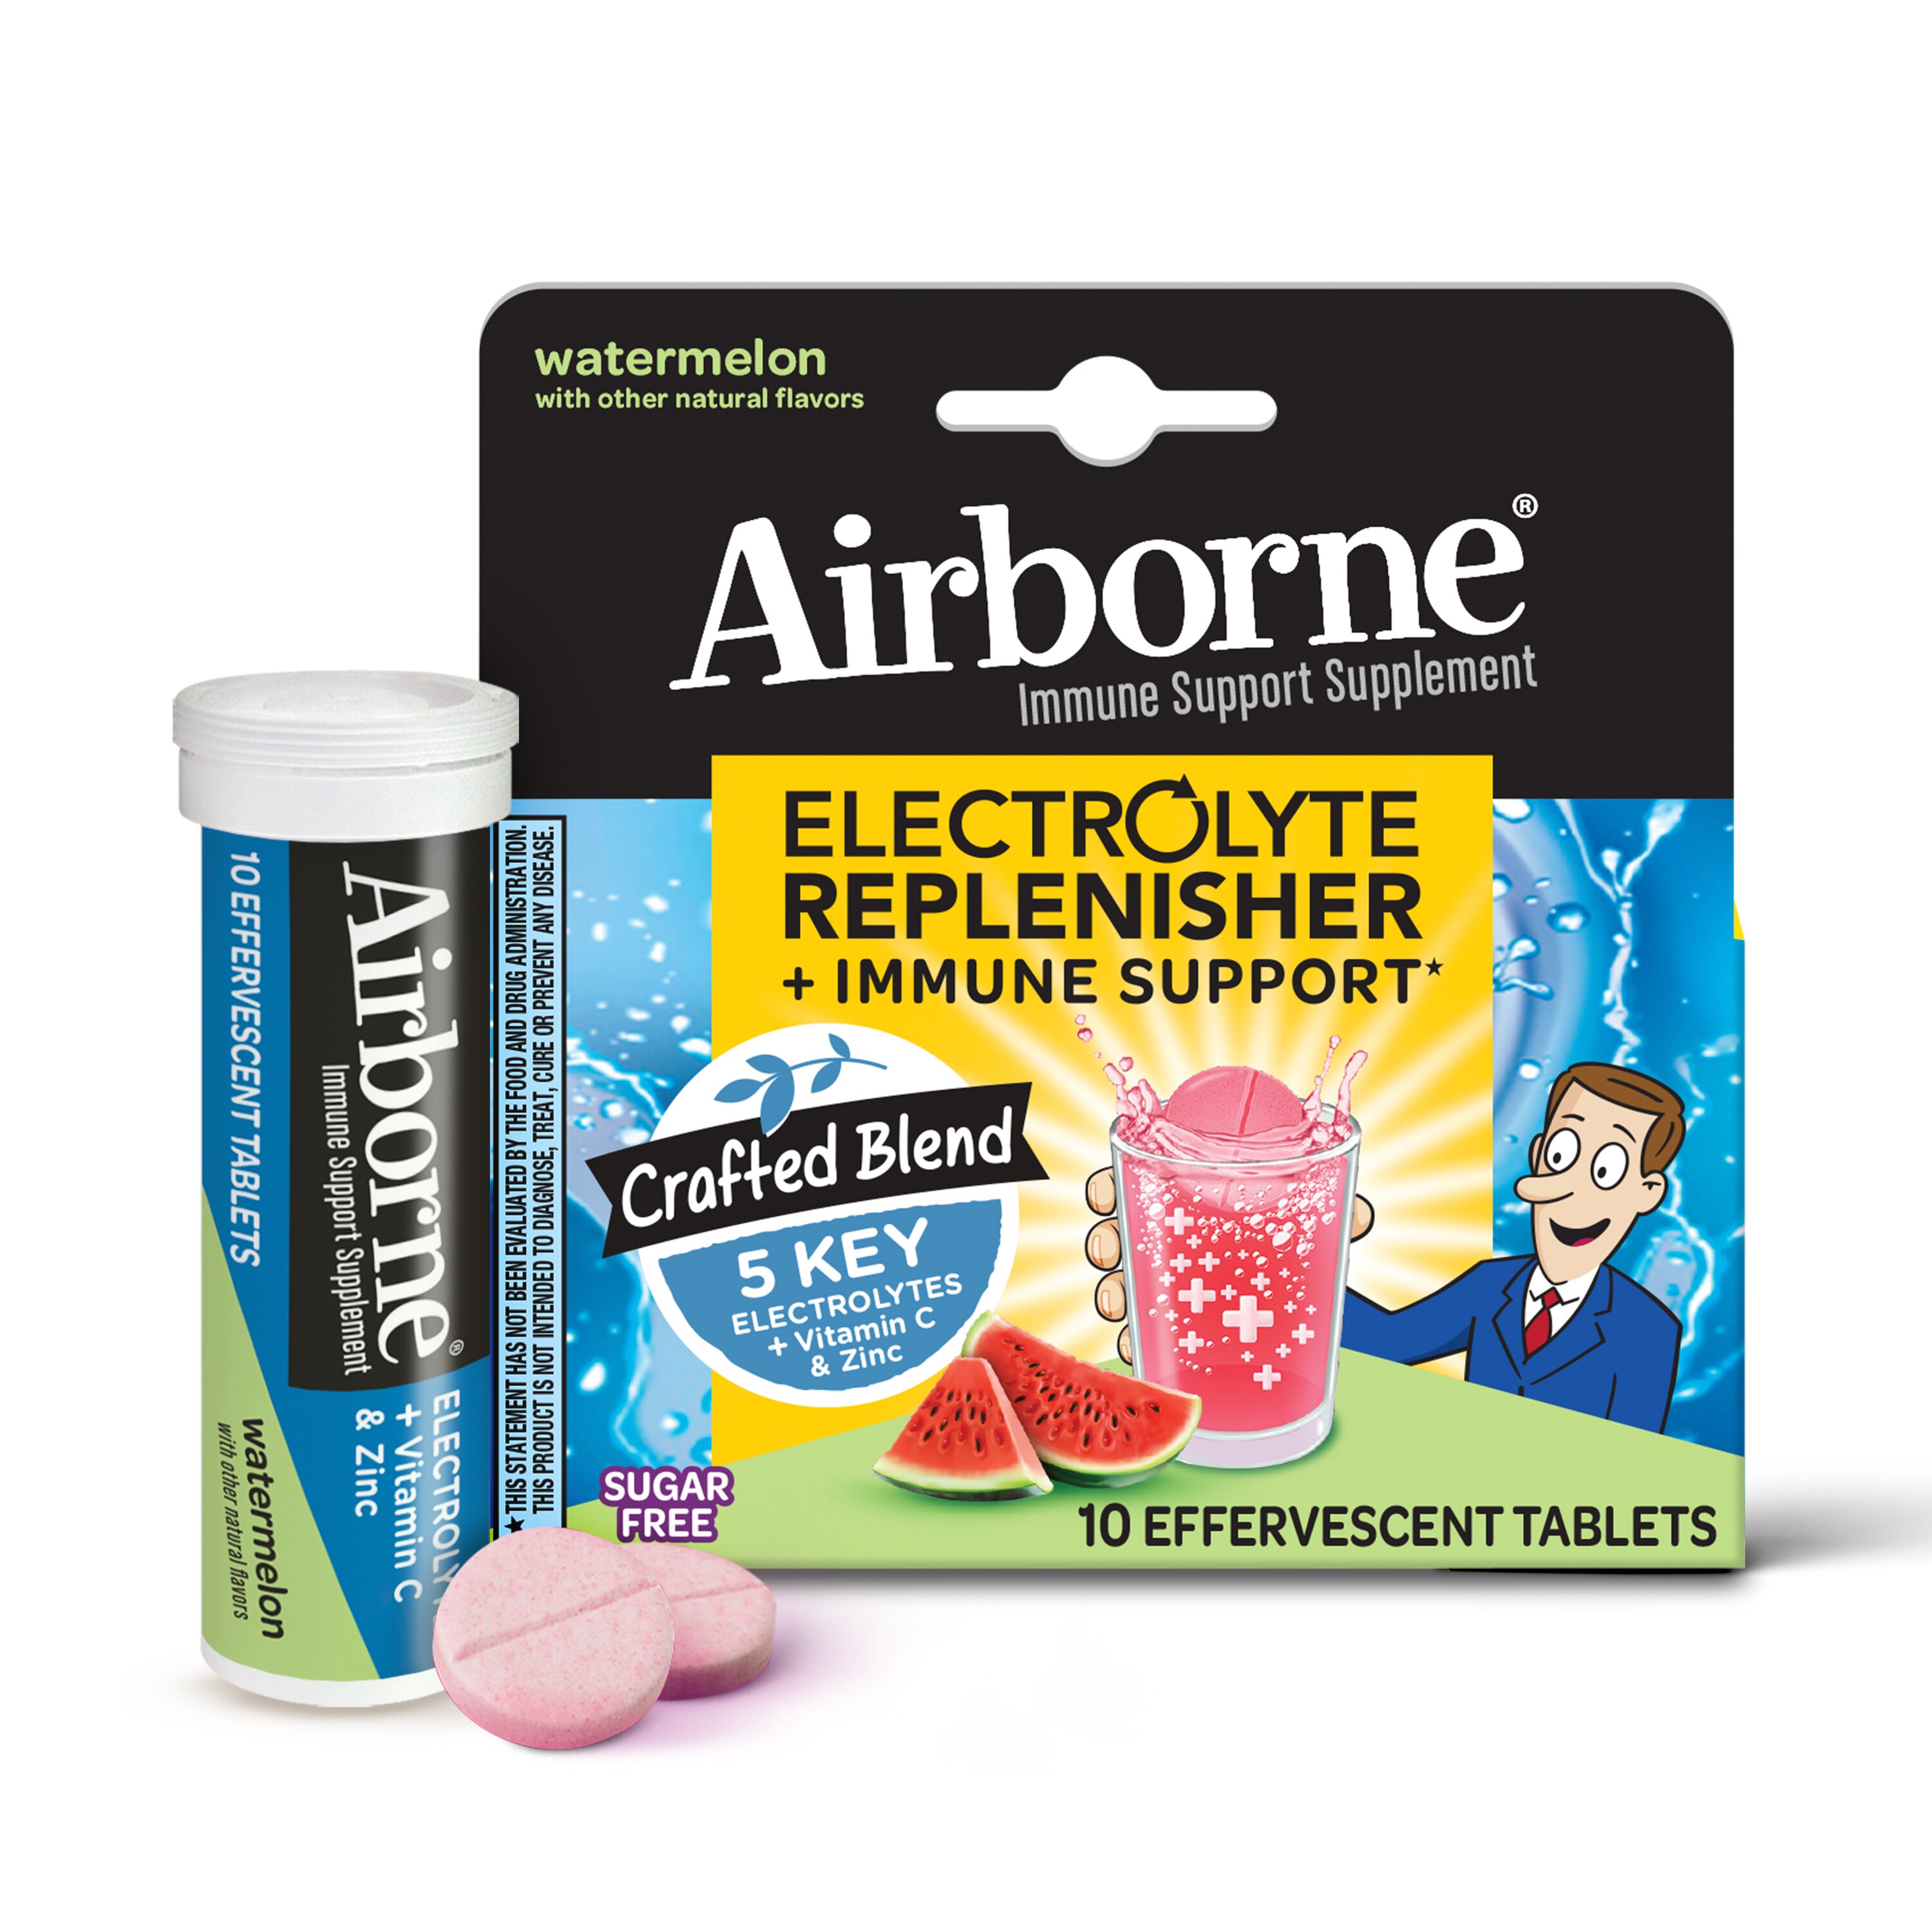 Airborne Electrolyte Replenisher Effervescent Tablets, 10 CT, Watermelon